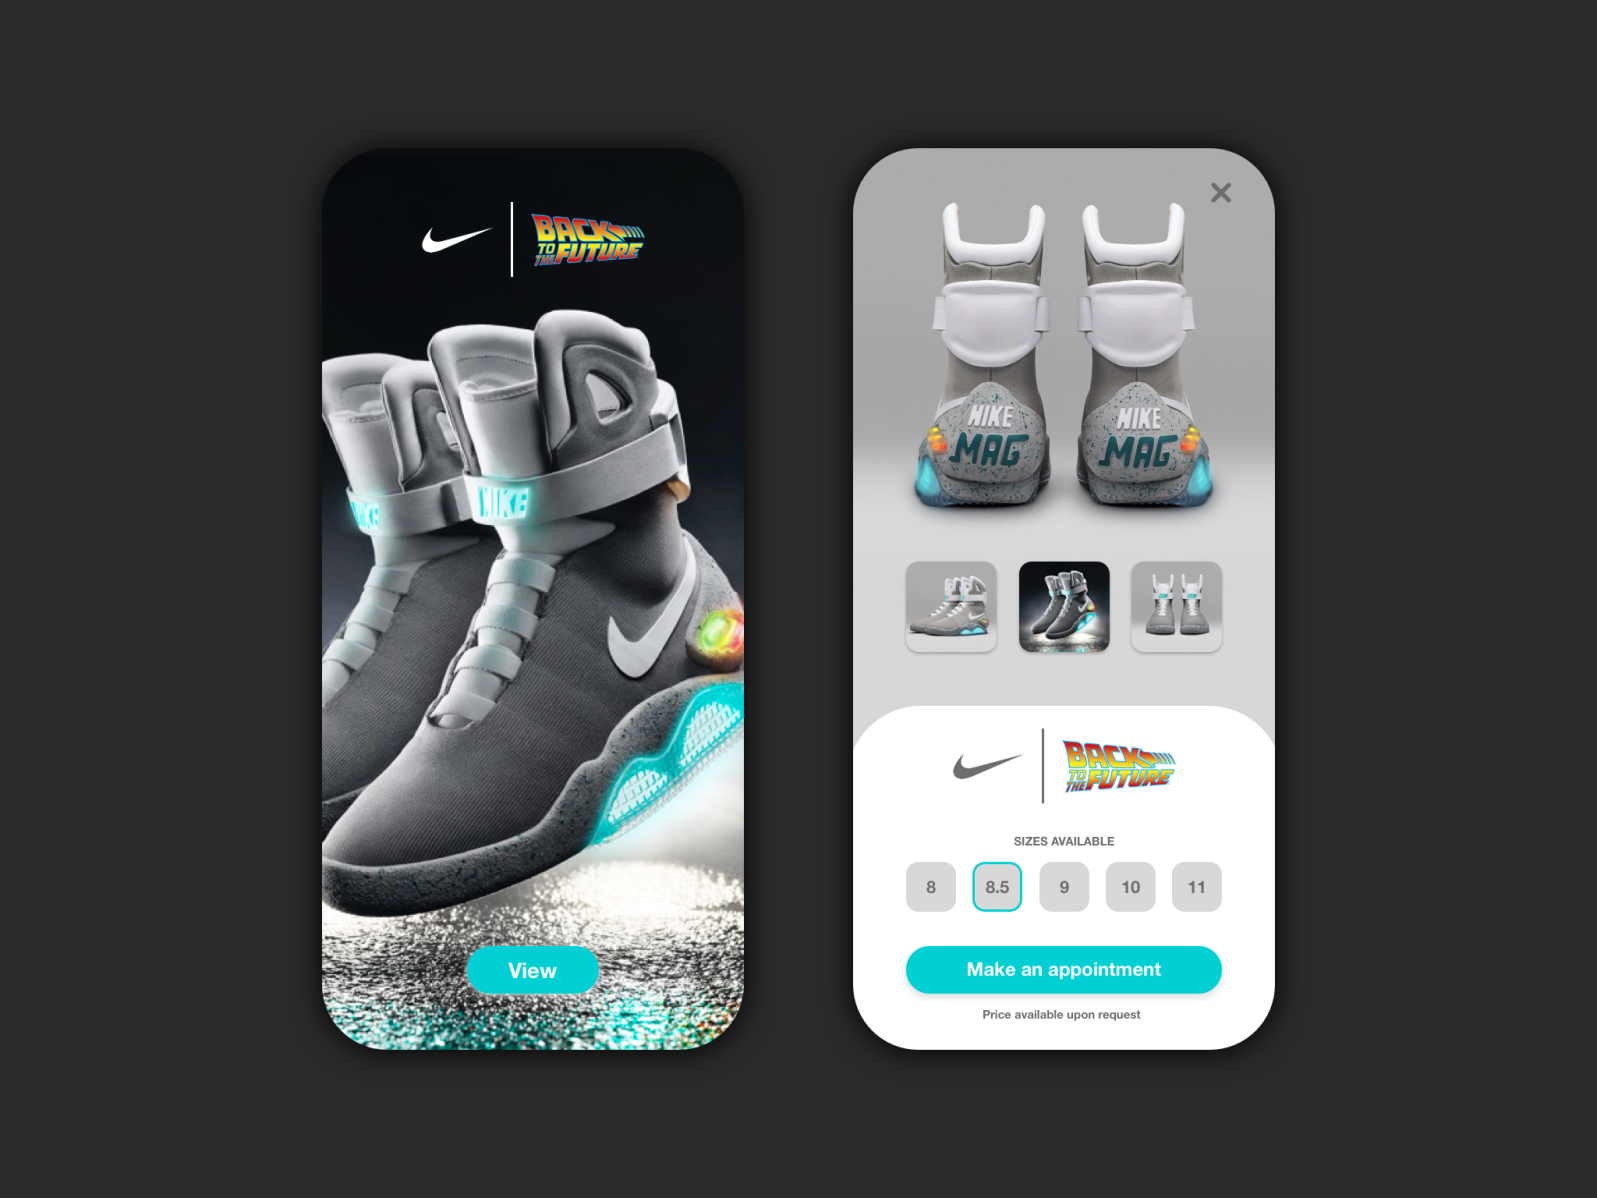 The Future - Nike Air Mag (UI Design) by Nayim on Dribbble